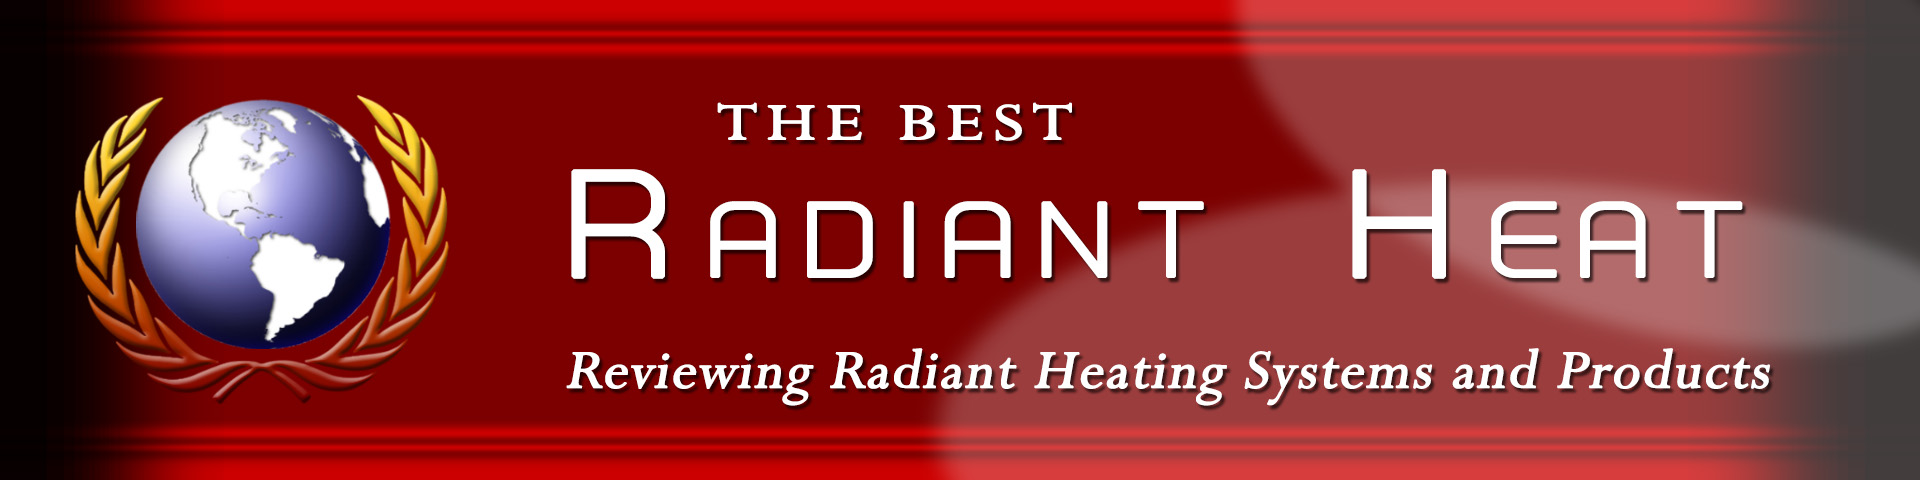 Best radiant heat systems banner.